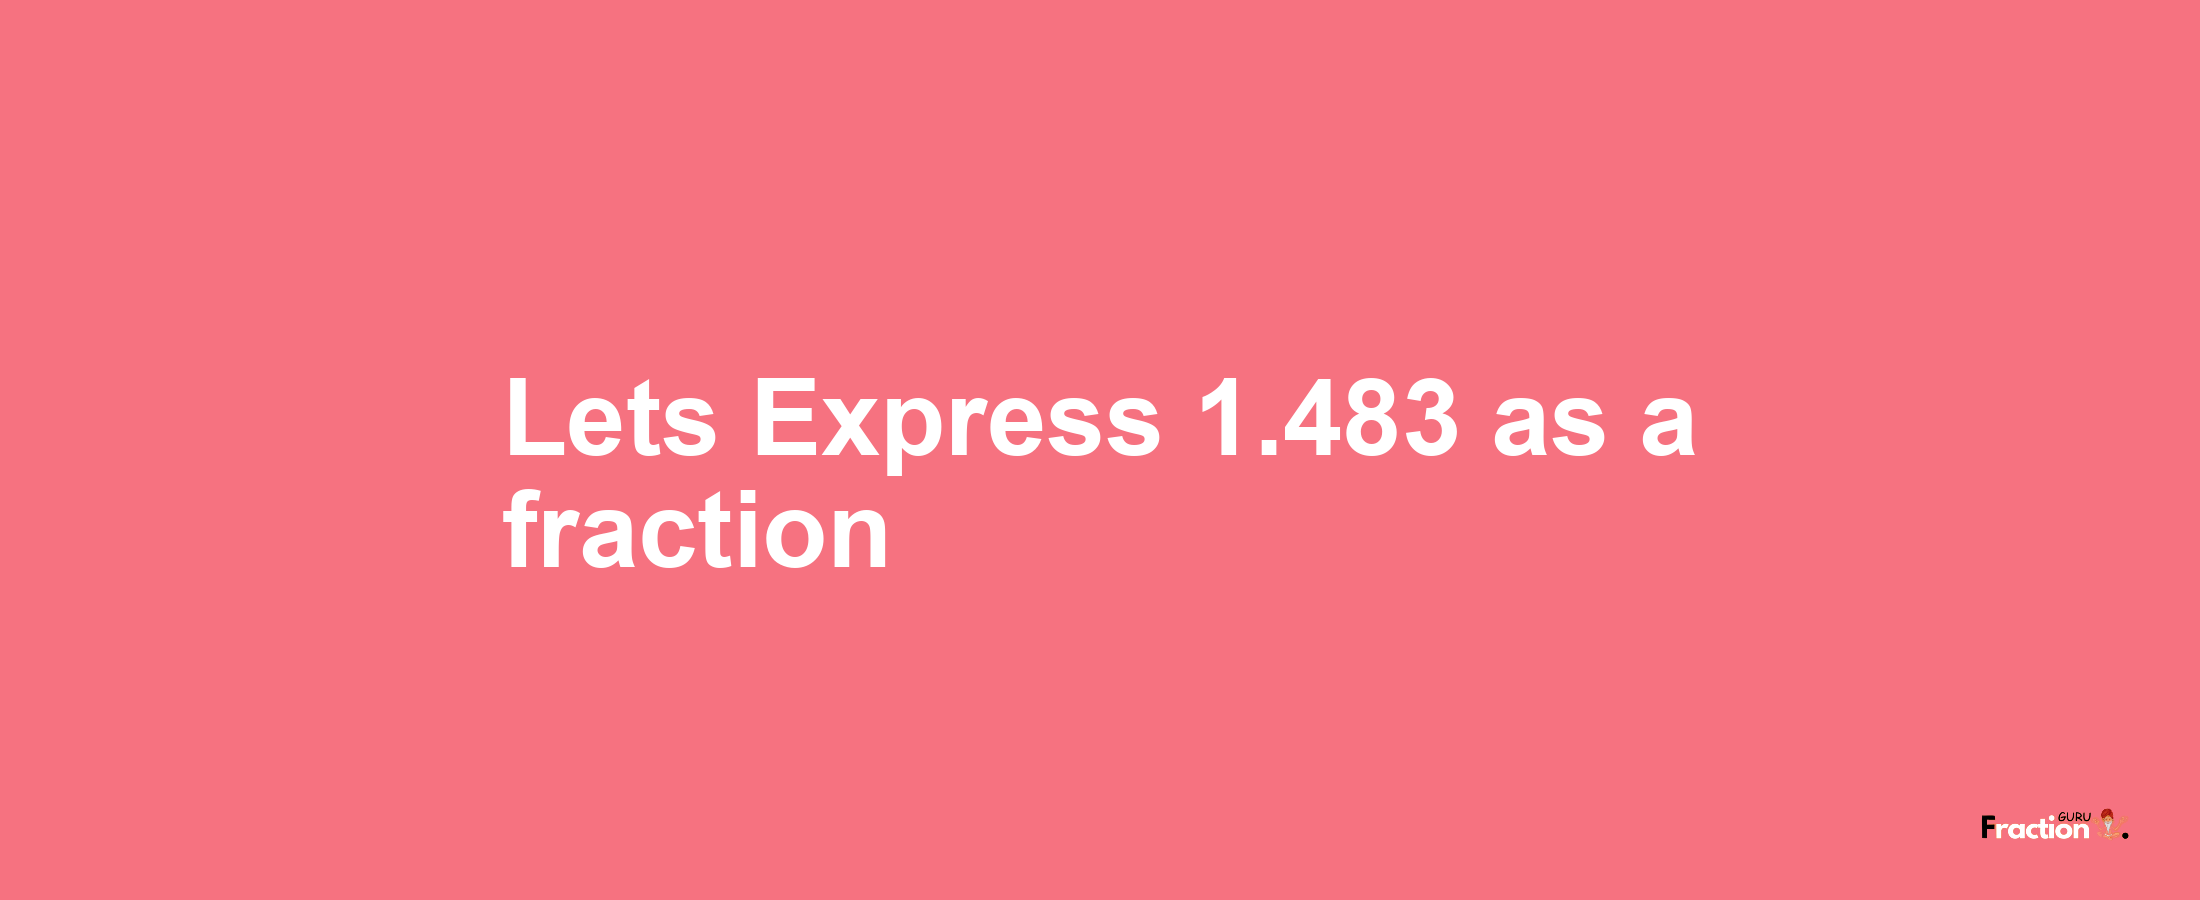 Lets Express 1.483 as afraction